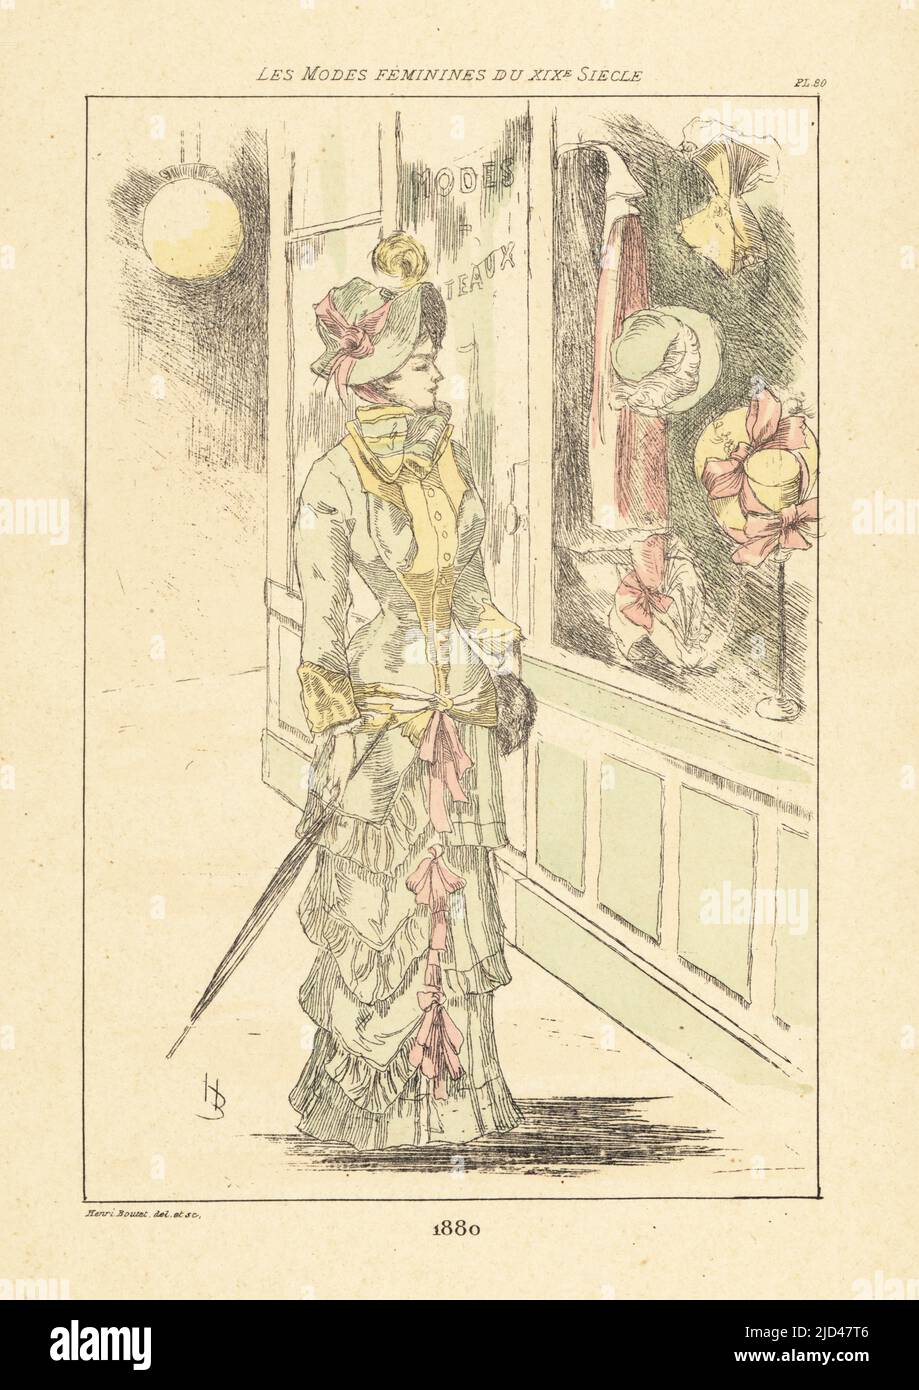 Fashionable woman window-shopping outside a clothes and hat shop, Paris, 1880. Handcoloured drypoint or pointe-seche etching by Henri Boutet from Les Modes Feminines du XIXeme Siecle (Female Fashions of the 19th Century), Ernest Flammarion, Paris, 1902. Boutet (1851-1919) was a French artist, engraver, lithographer and designer. Stock Photo